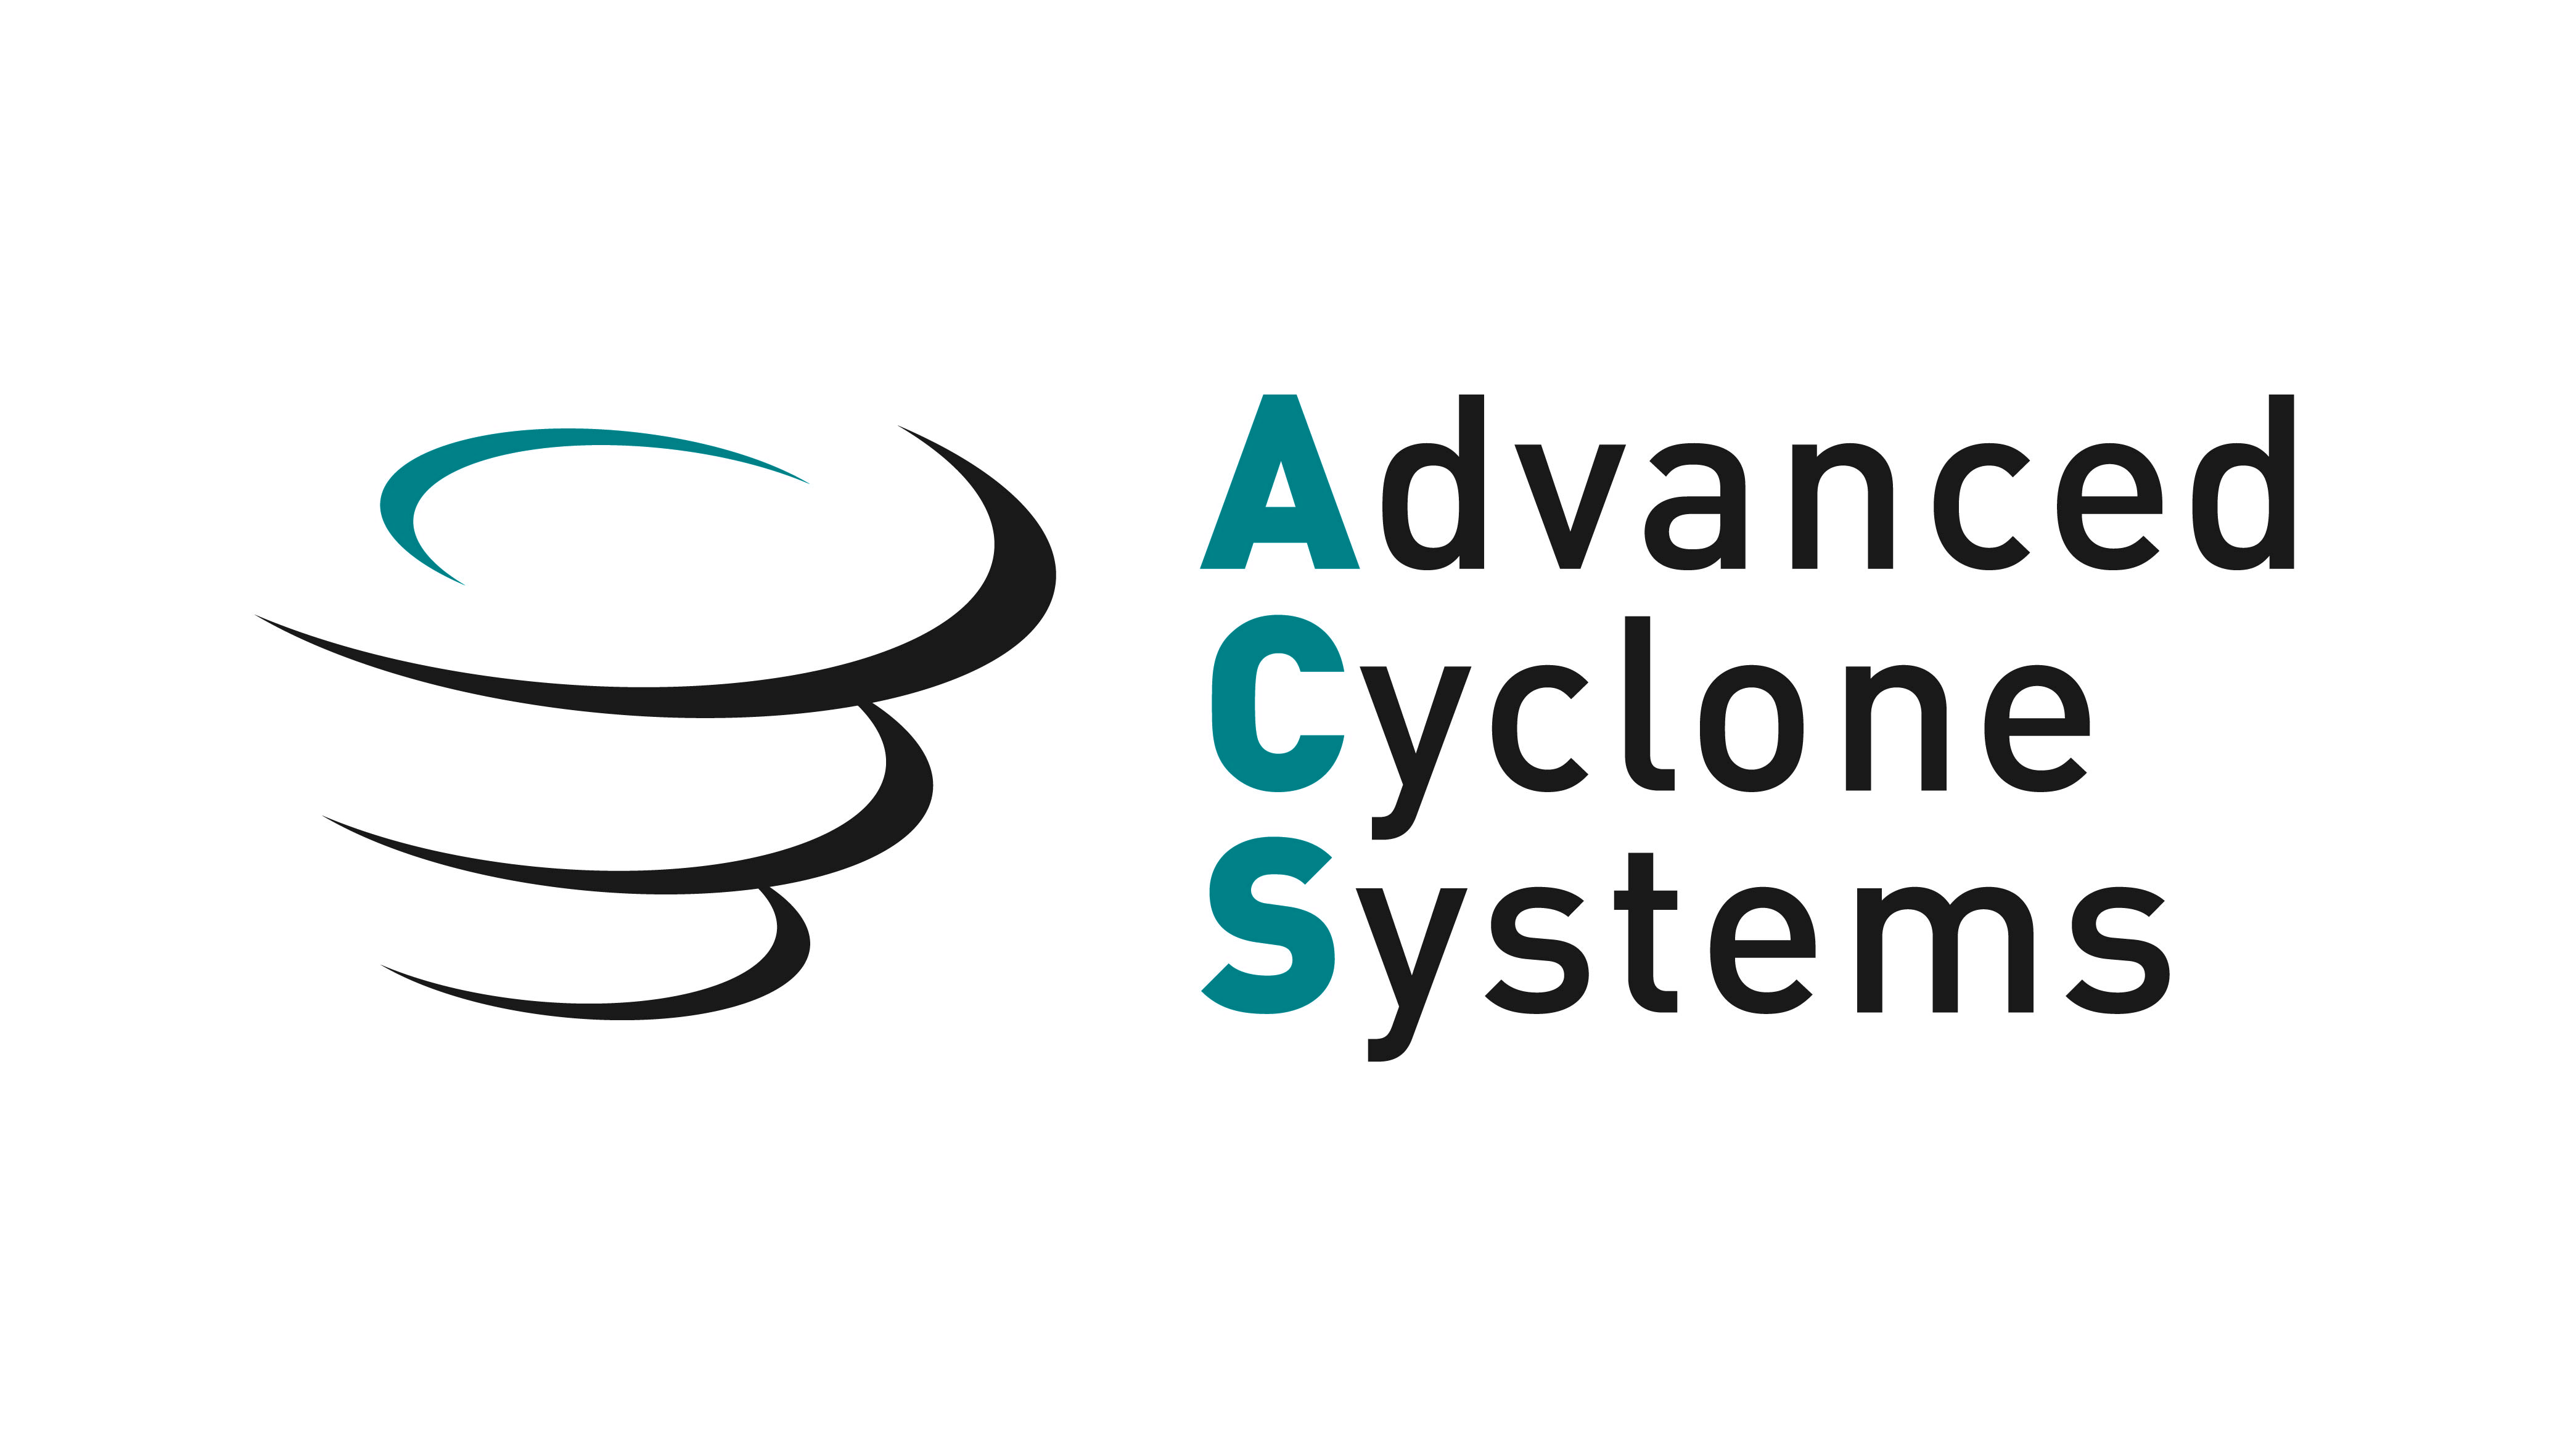 Advanced Cyclone Systems